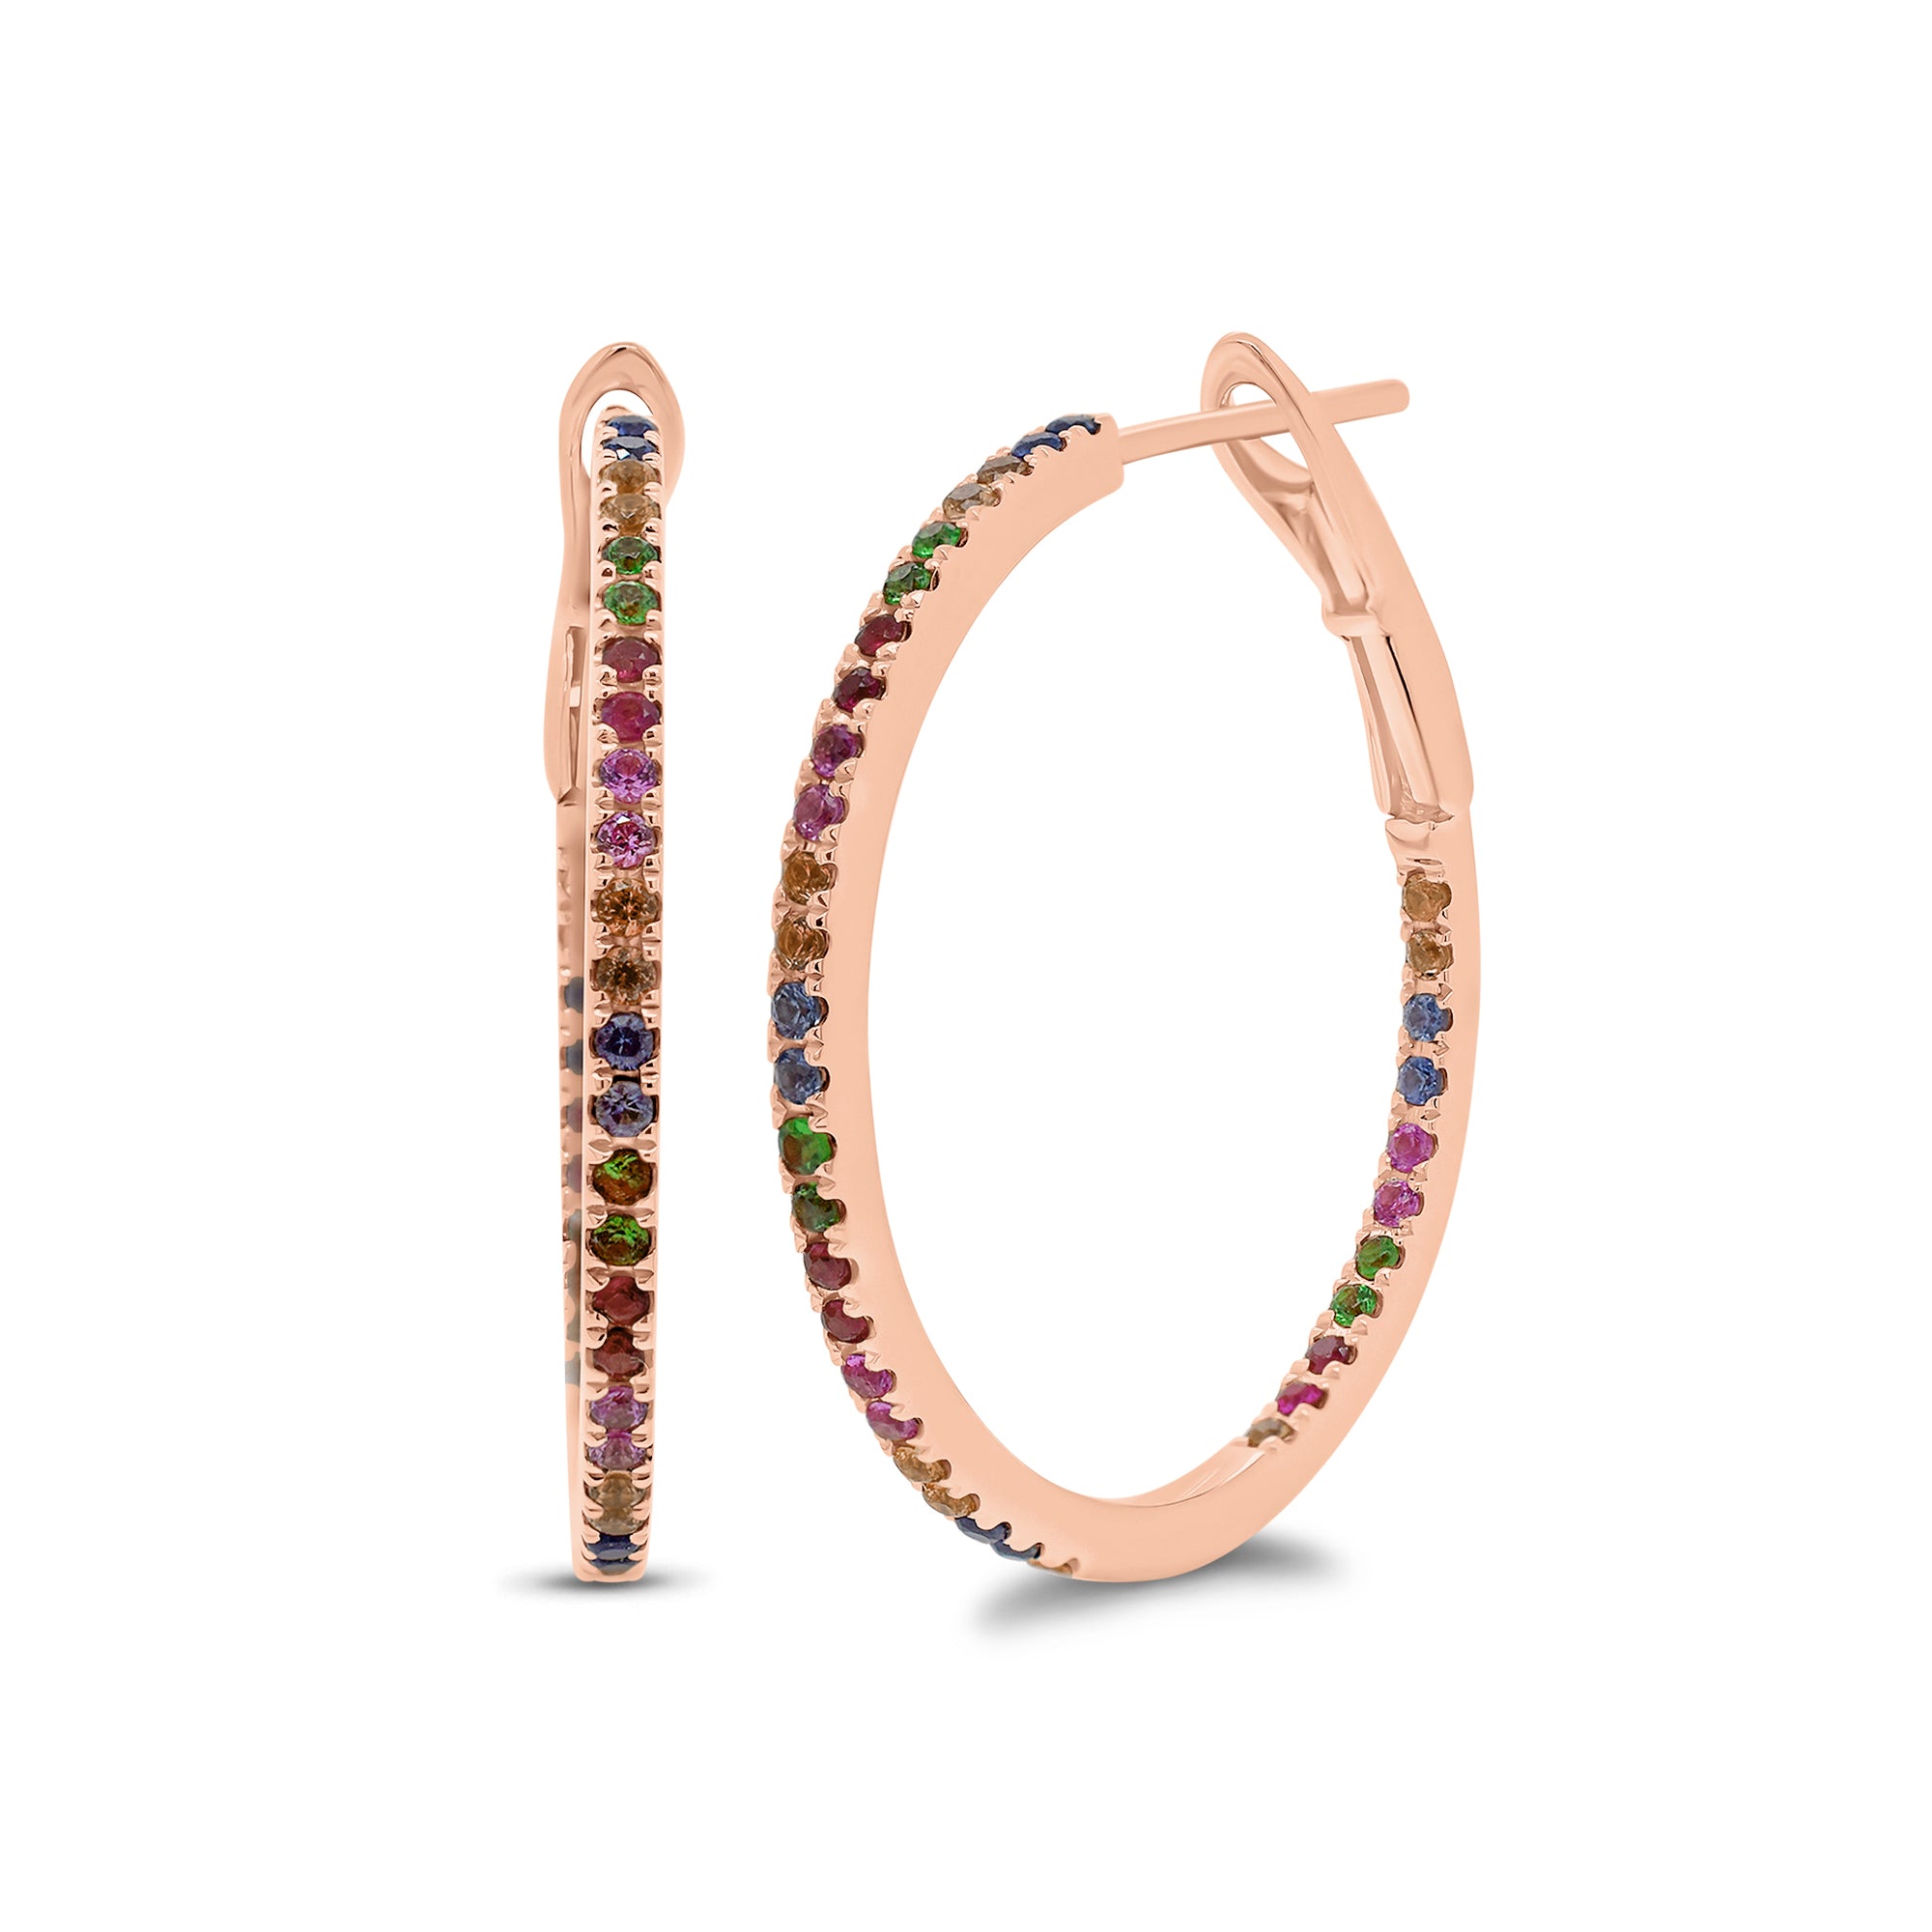 Rainbow Sapphire Interior and Exterior Hoop Earrings - 14K gold weighing 3.62 grams  - 72 sapphires weighing 0.70 carats